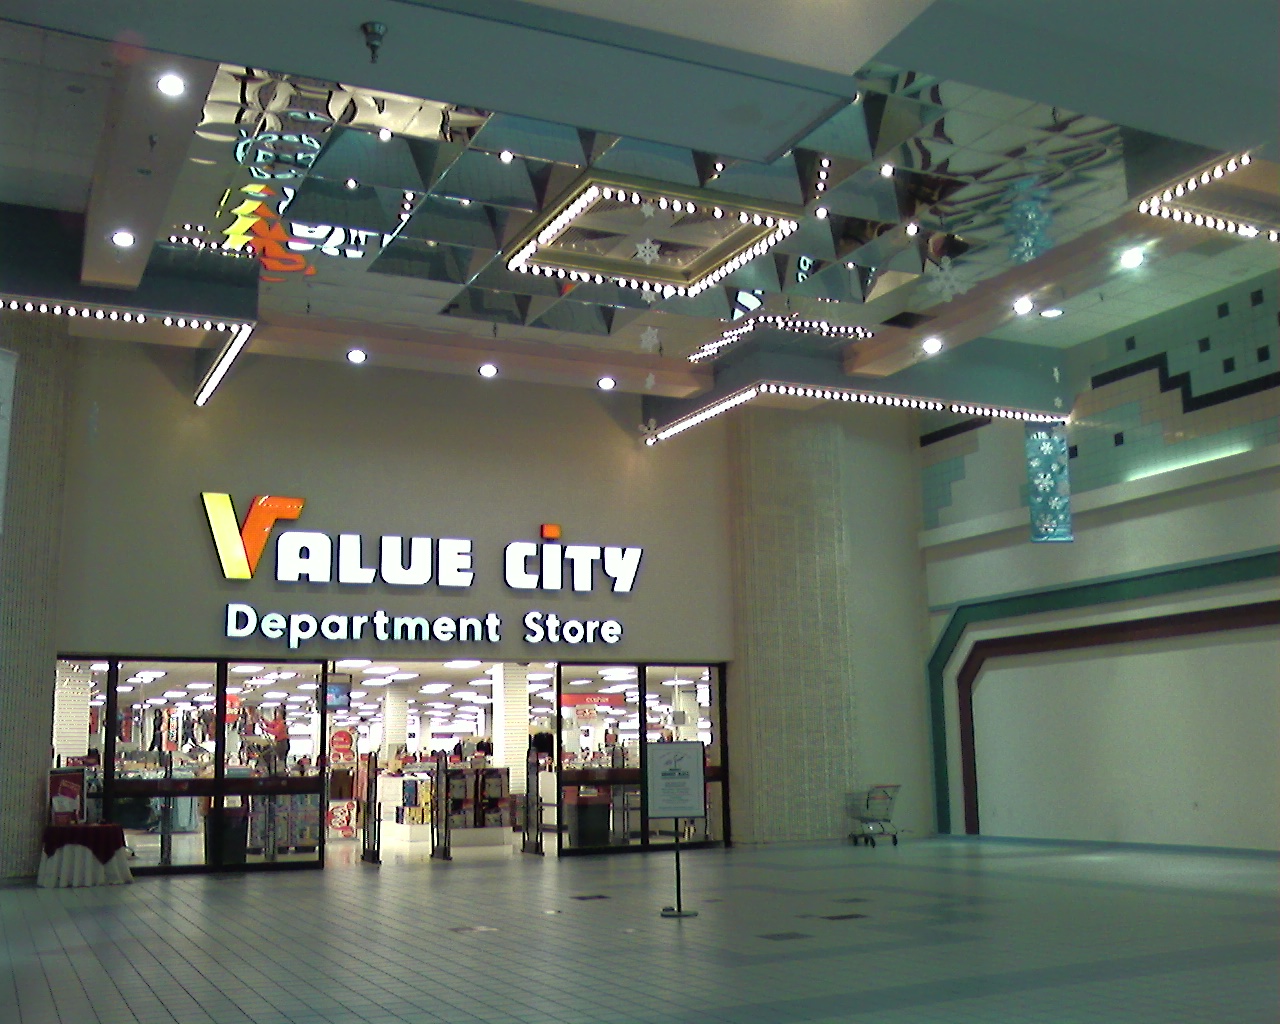 Value City (former Steinbach) at Shore Mall in Egg Harbor Township, New Jersey